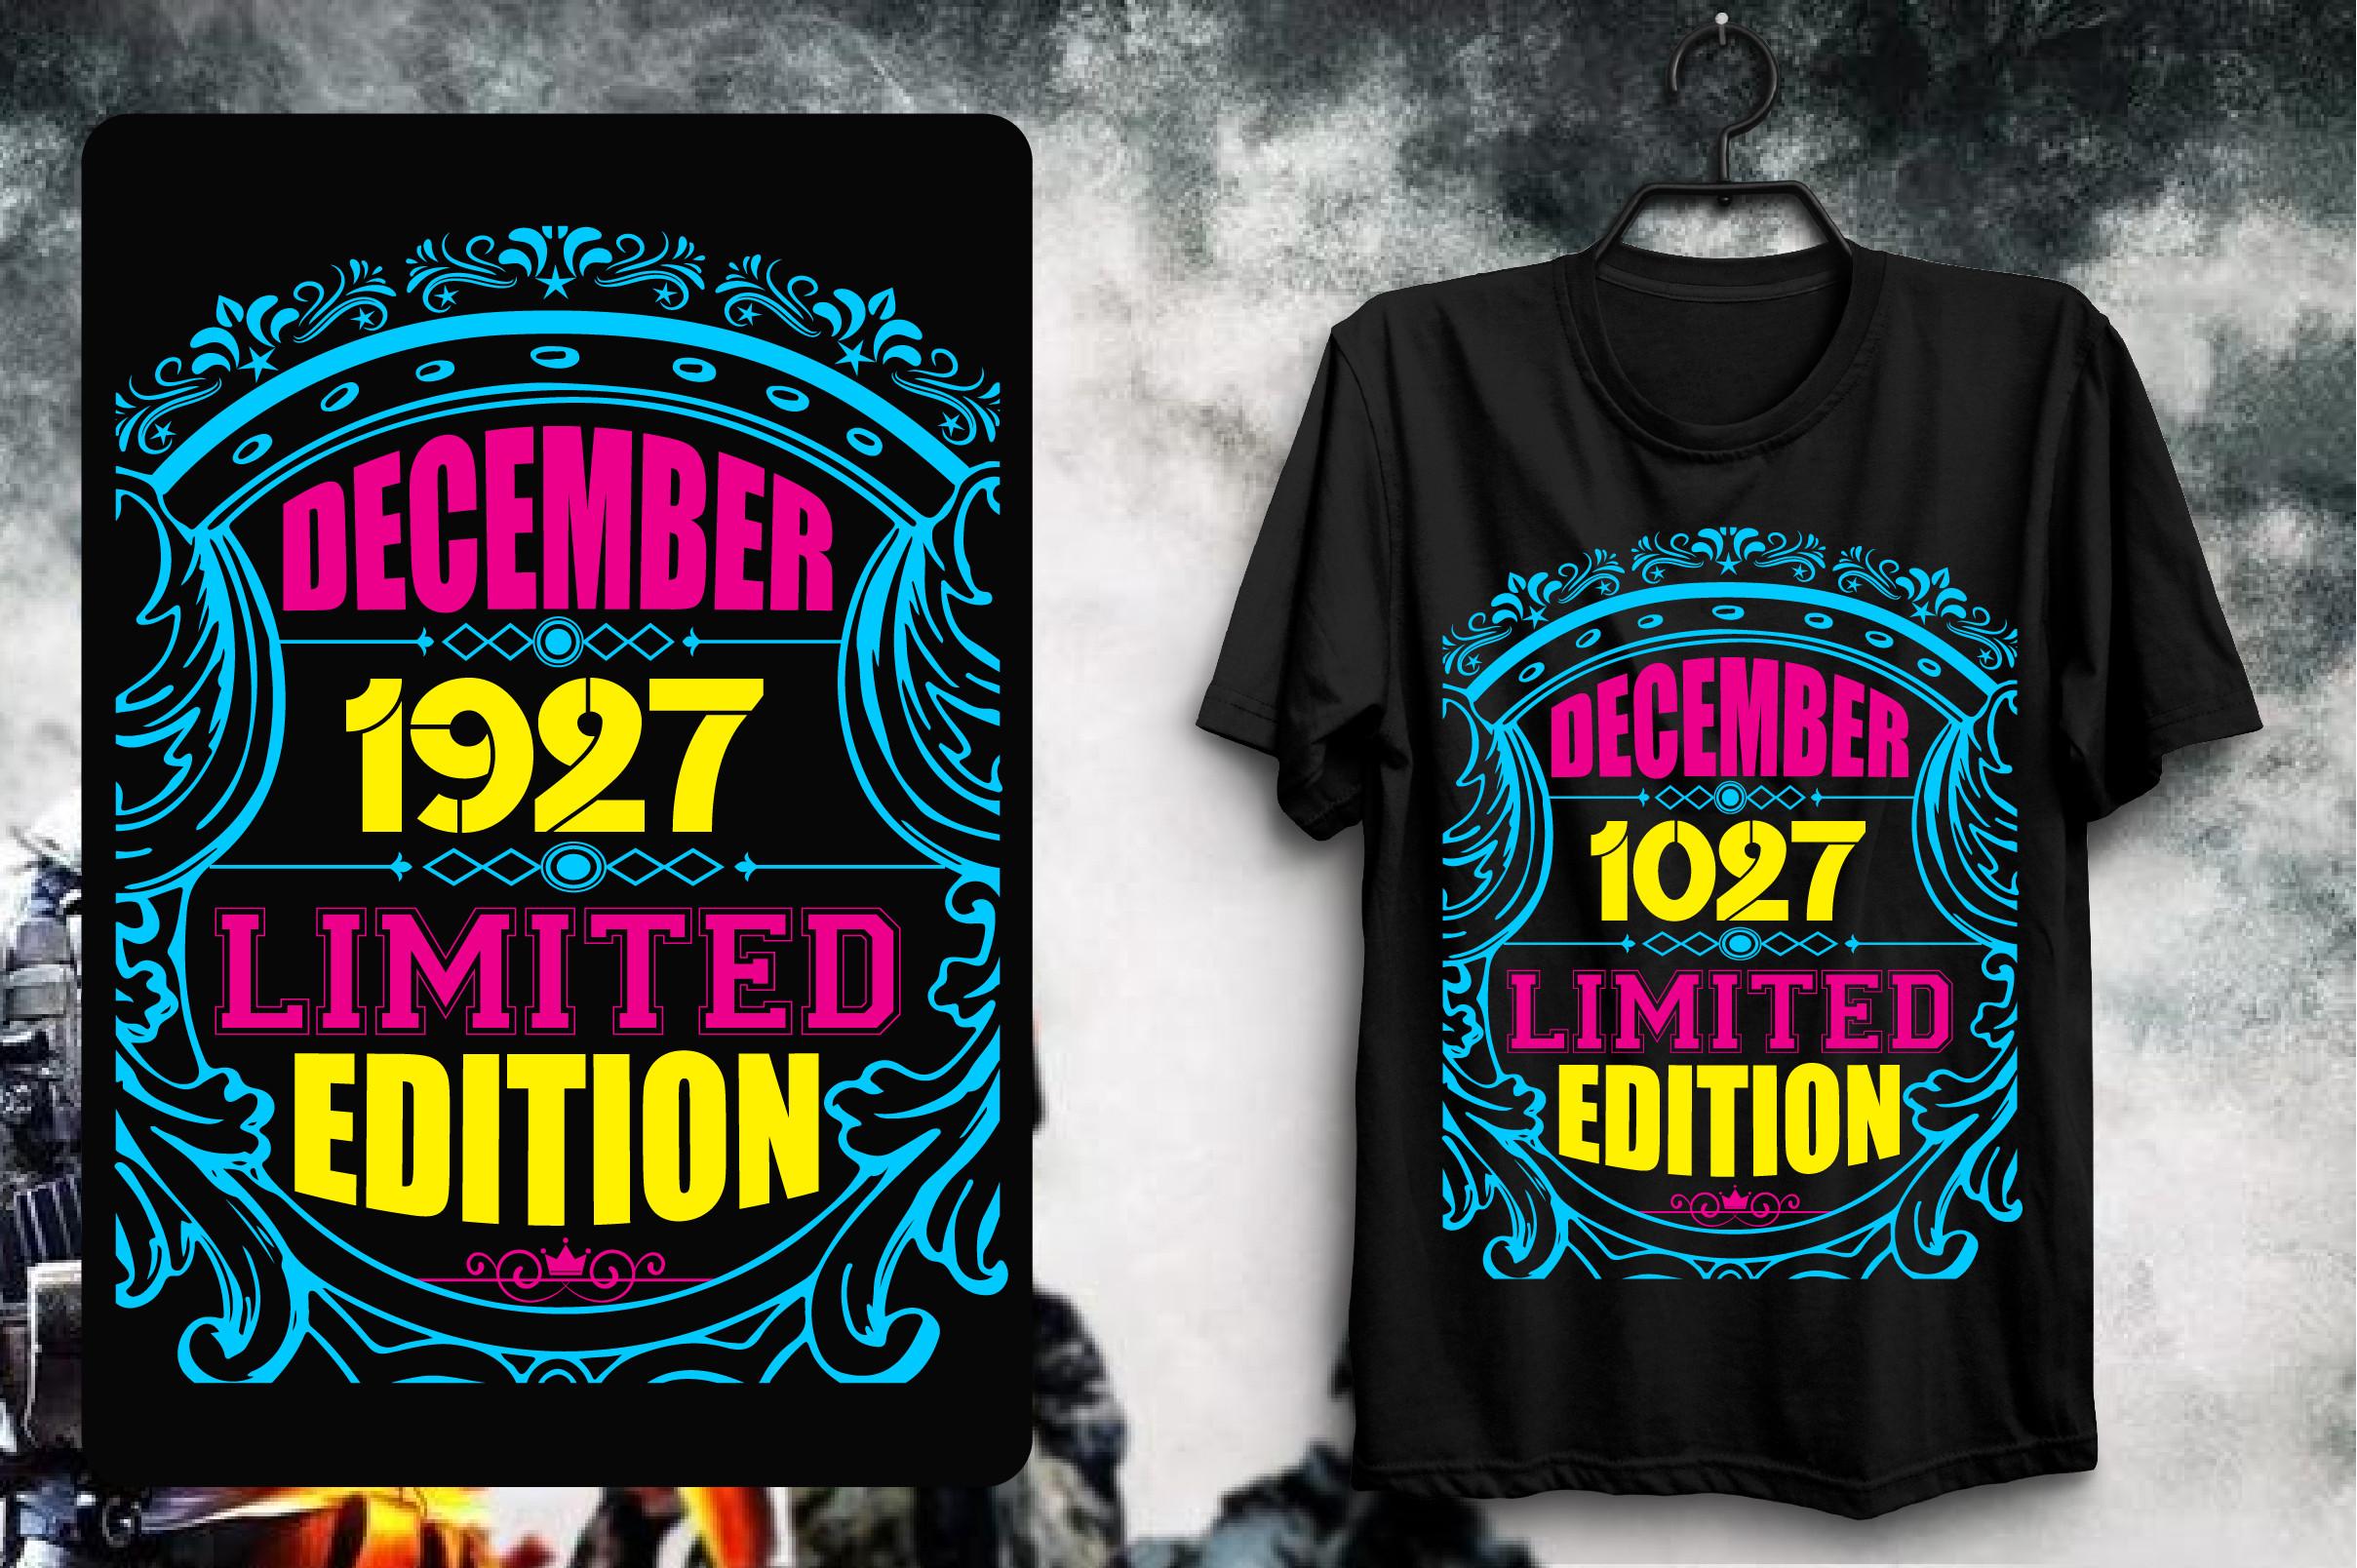 December 1927 Limited Edition